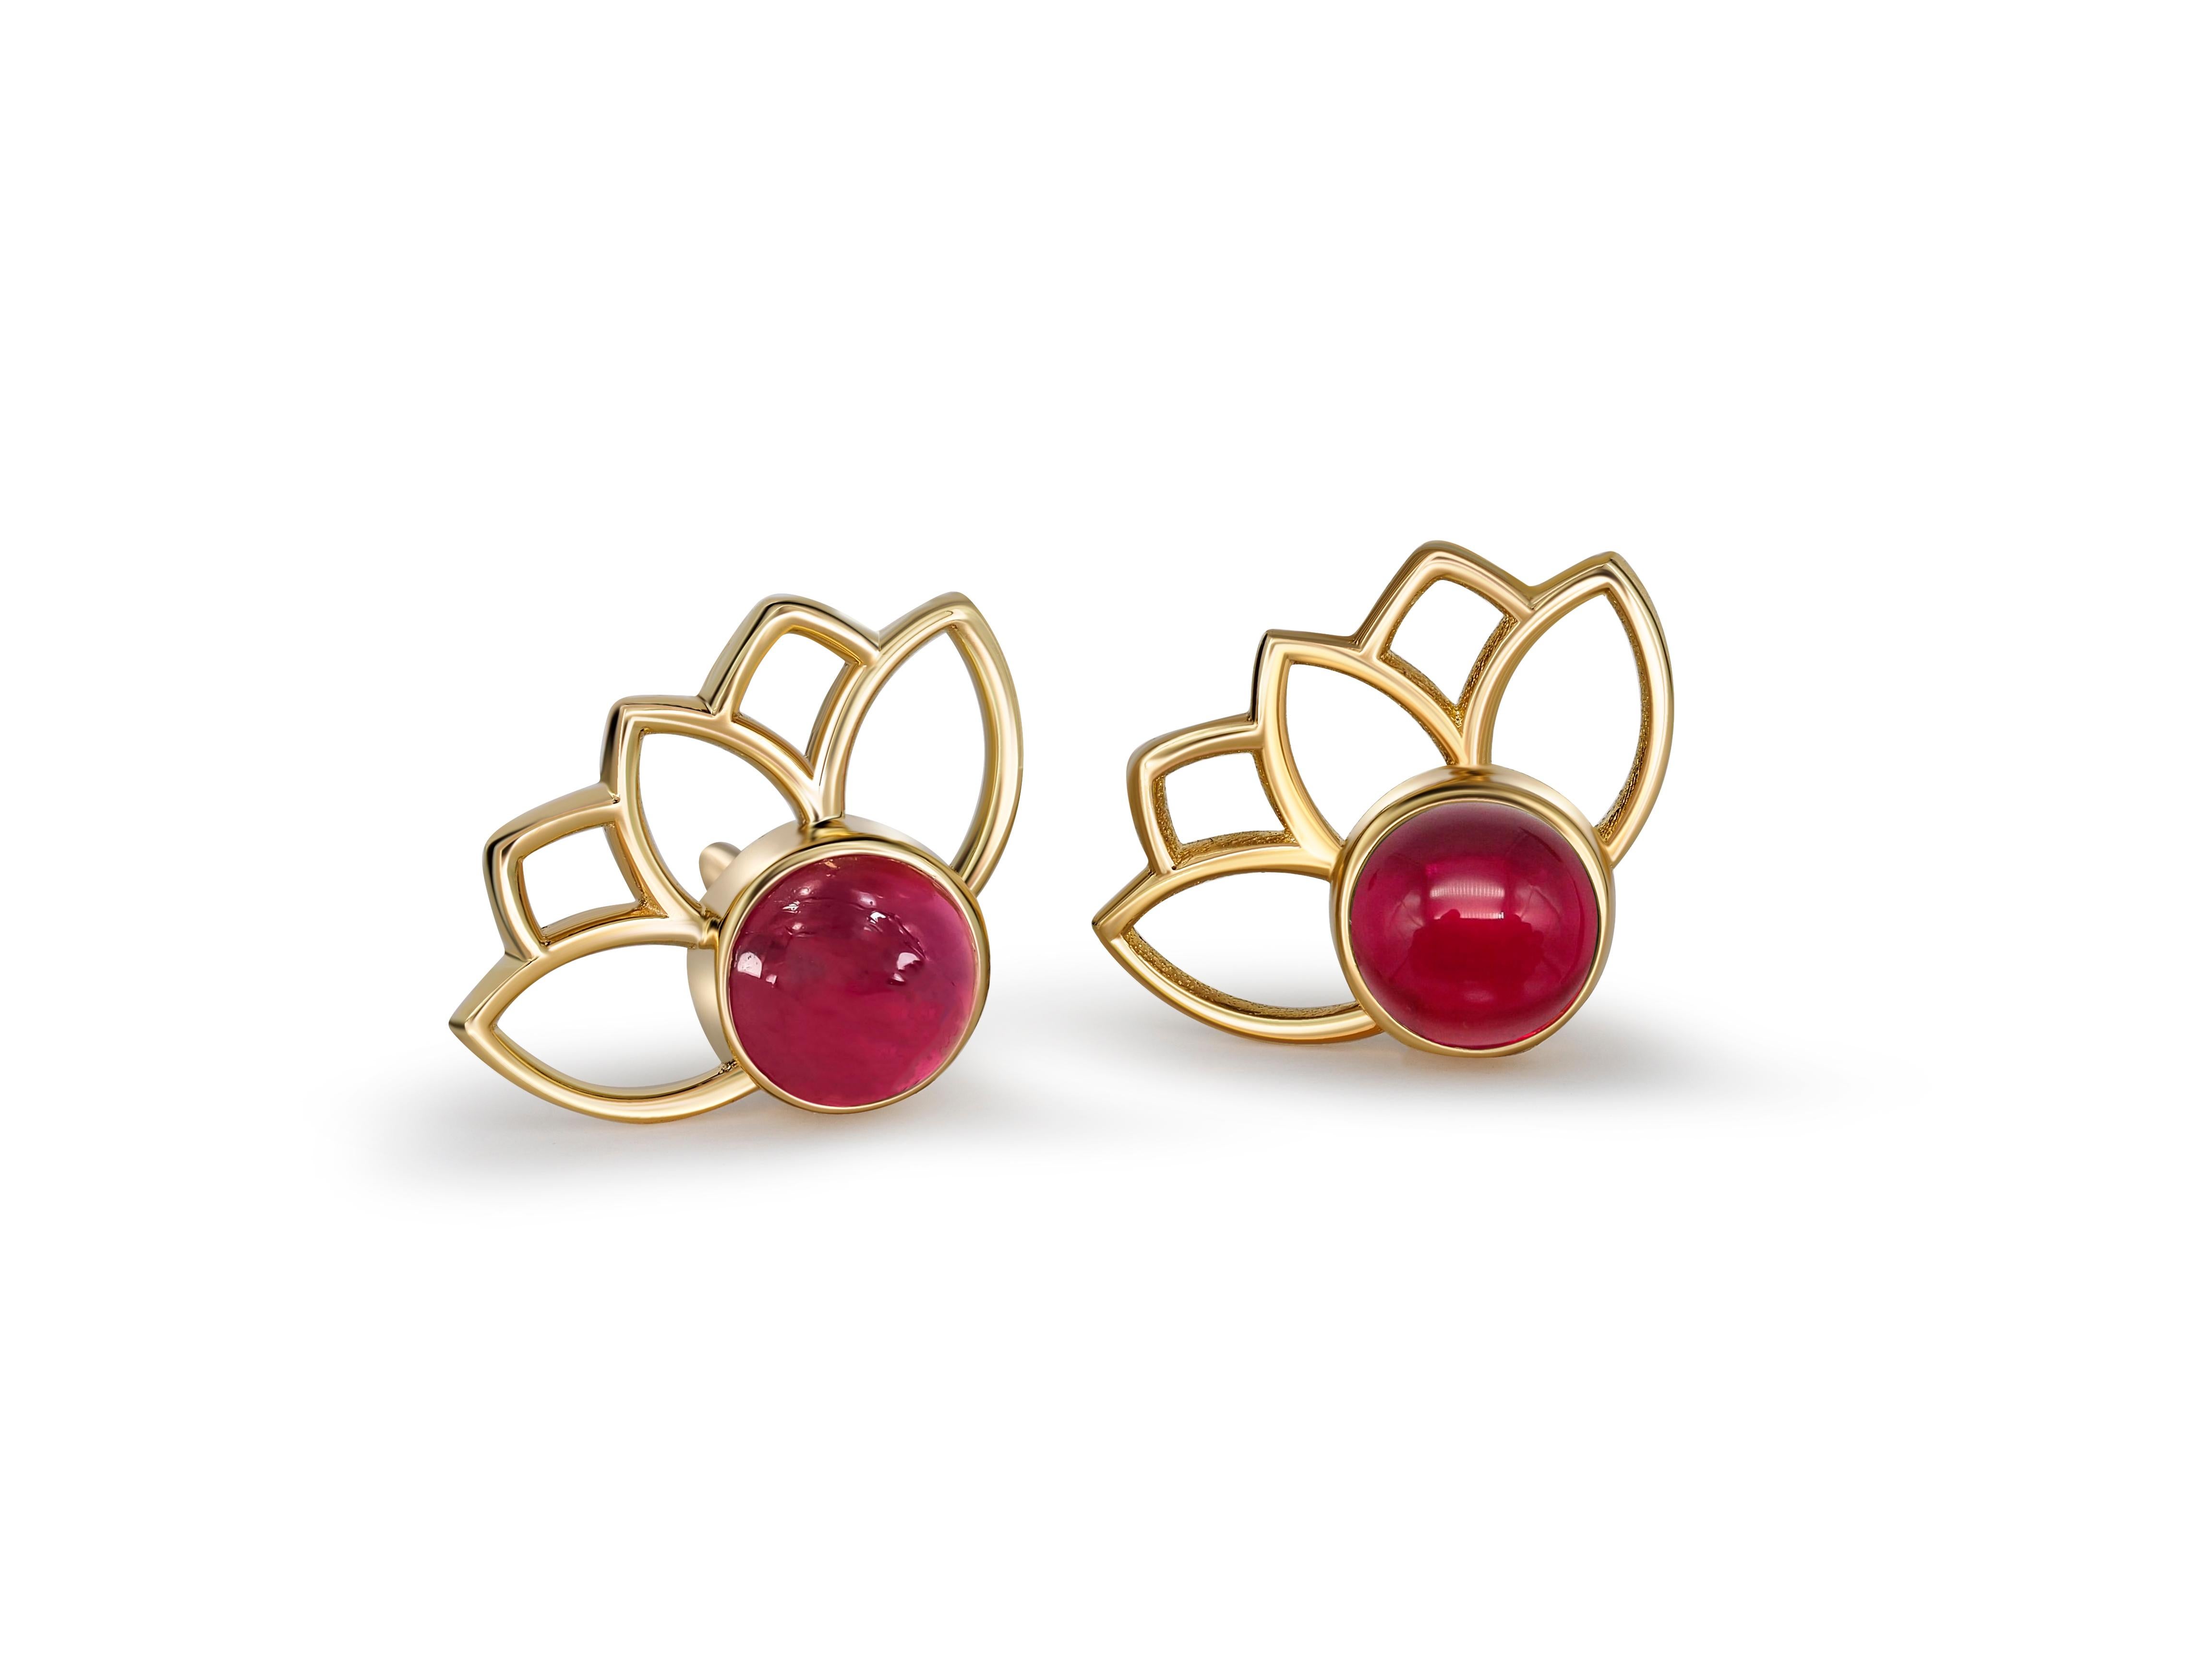 Cabochon Lotus earrings studs with rubies in 14k gold.  For Sale